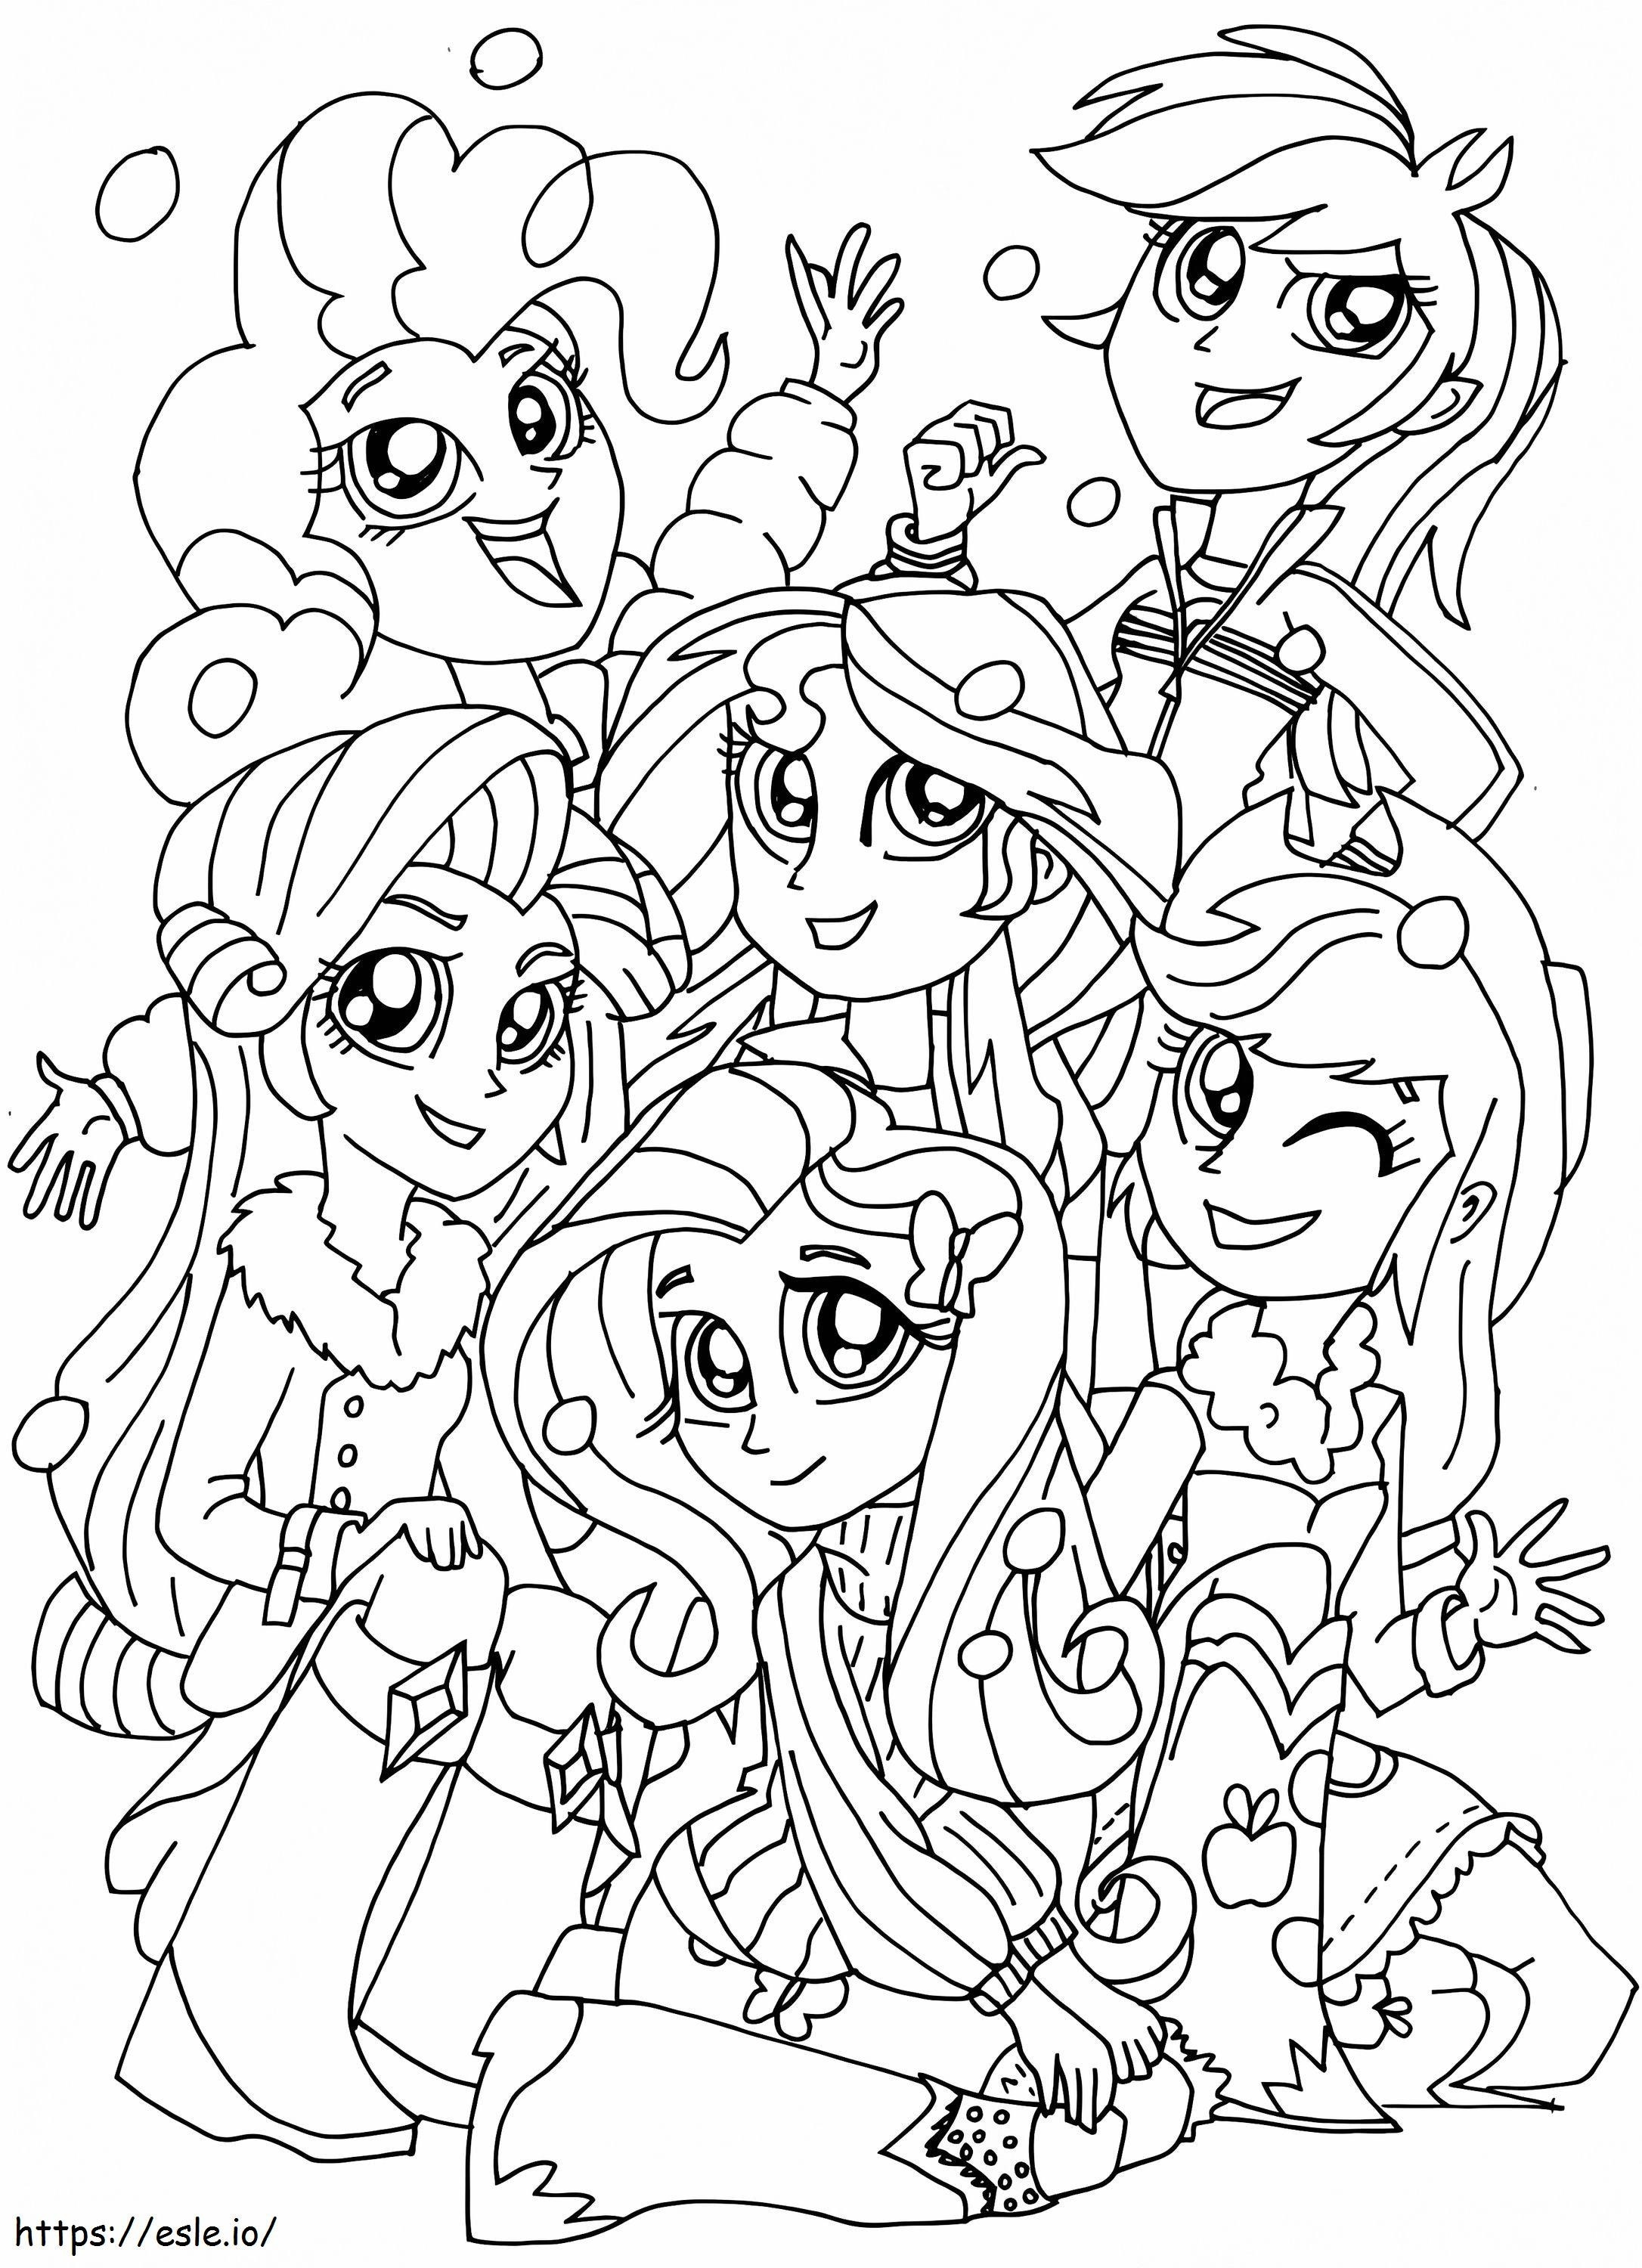 1535163248 Happy Equestria Girls A4 coloring page